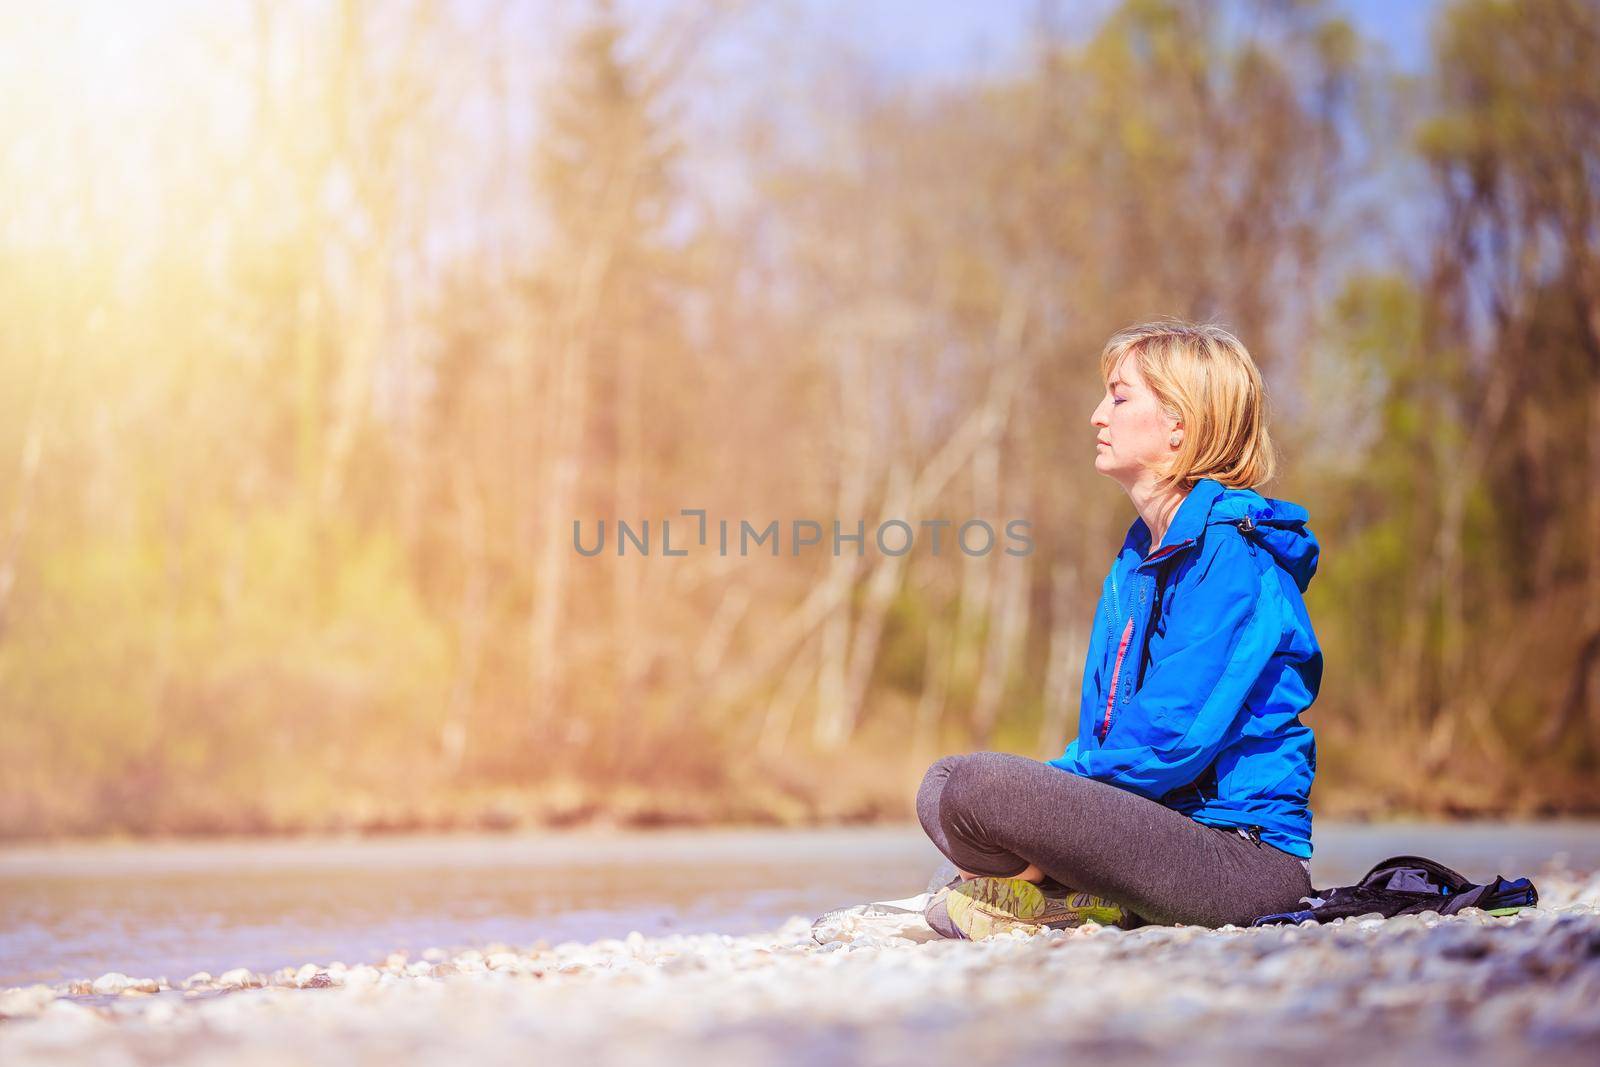 Meditation and relaxation: Woman is meditating outdoors on a pebble beach. Enjoying the morning sun. by Daxenbichler